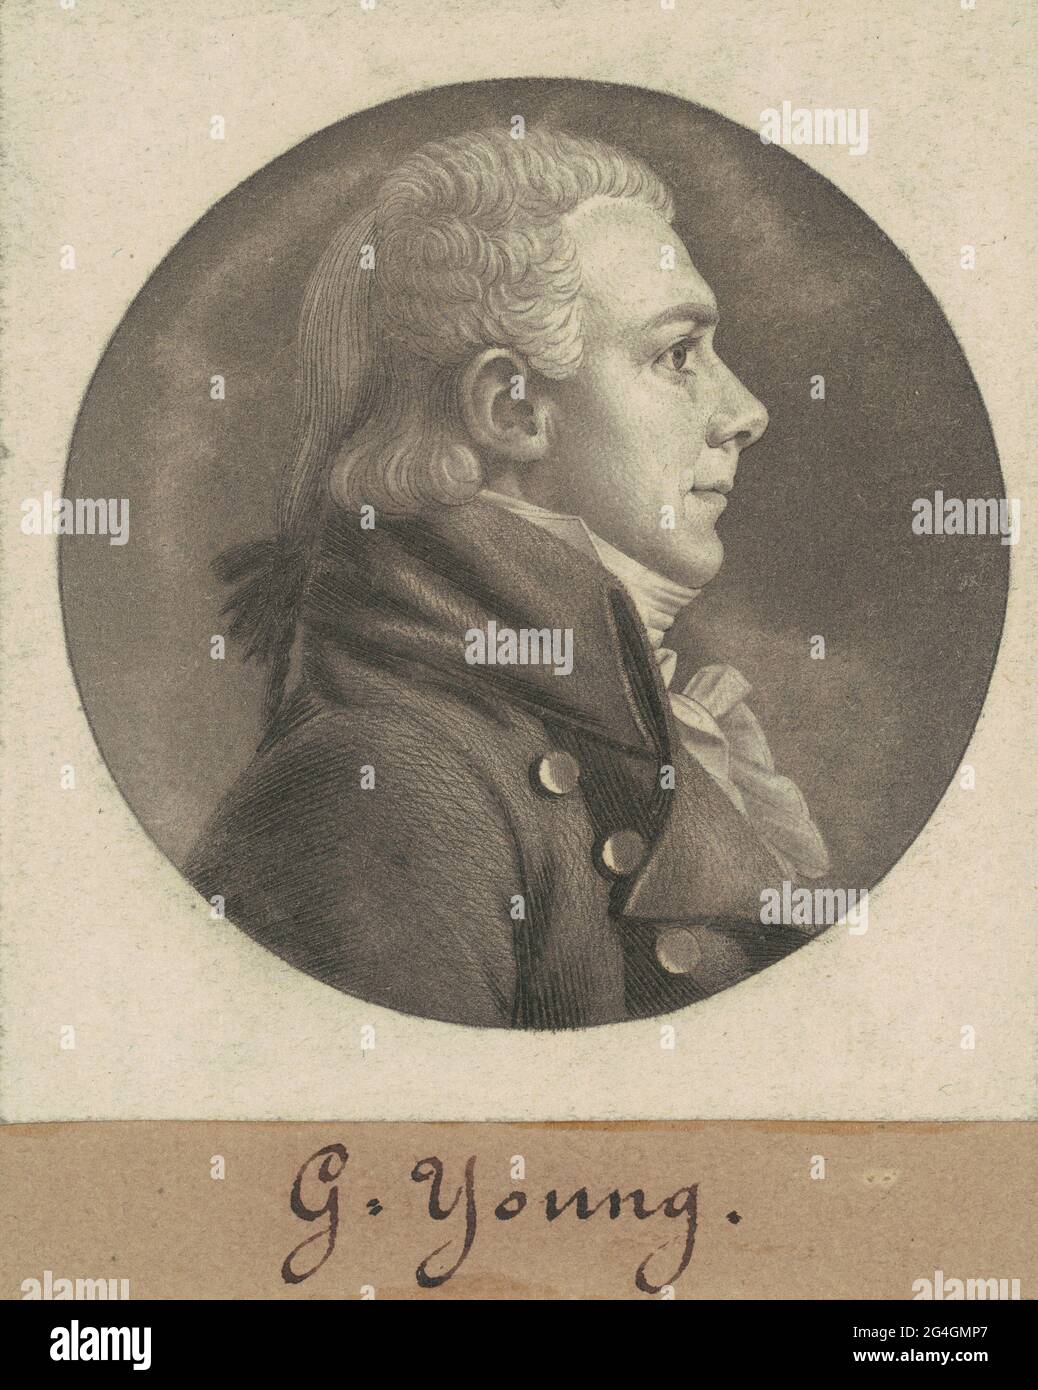 George Young, 1805. Stock Photo